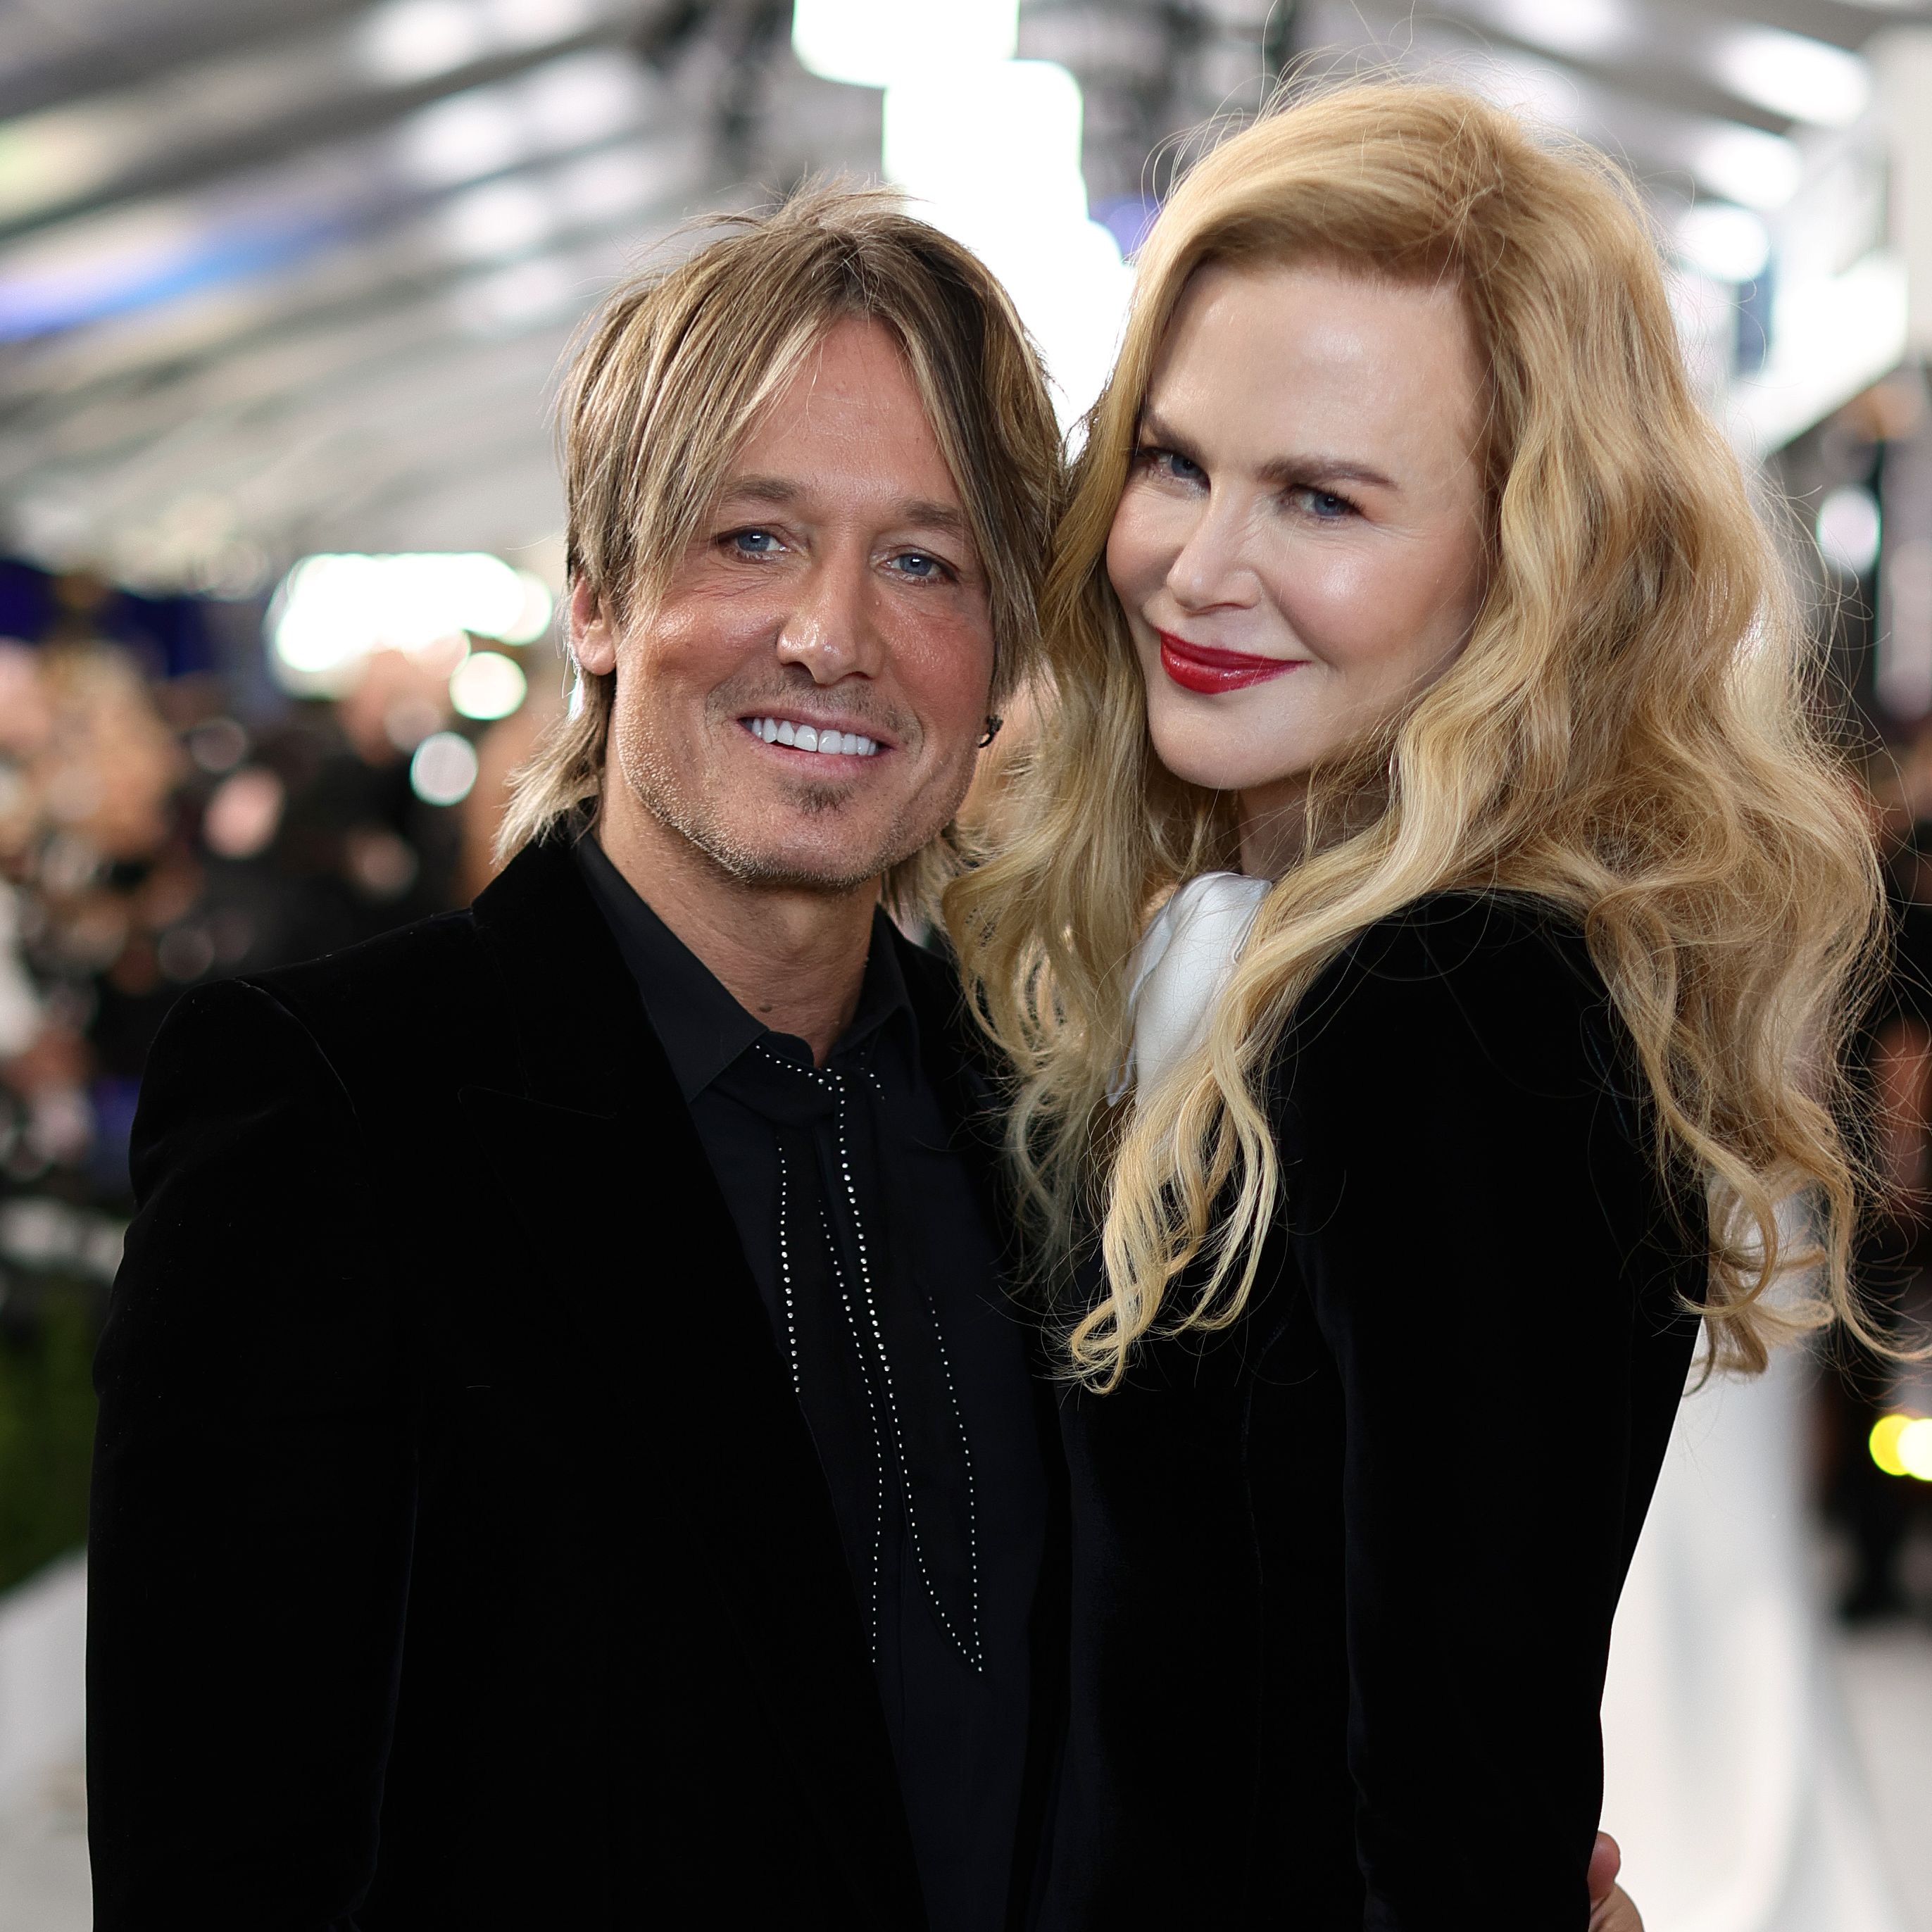 Nicole Kidman Shares Never-Before-Seen Wedding Photo of Her and Keith Urban